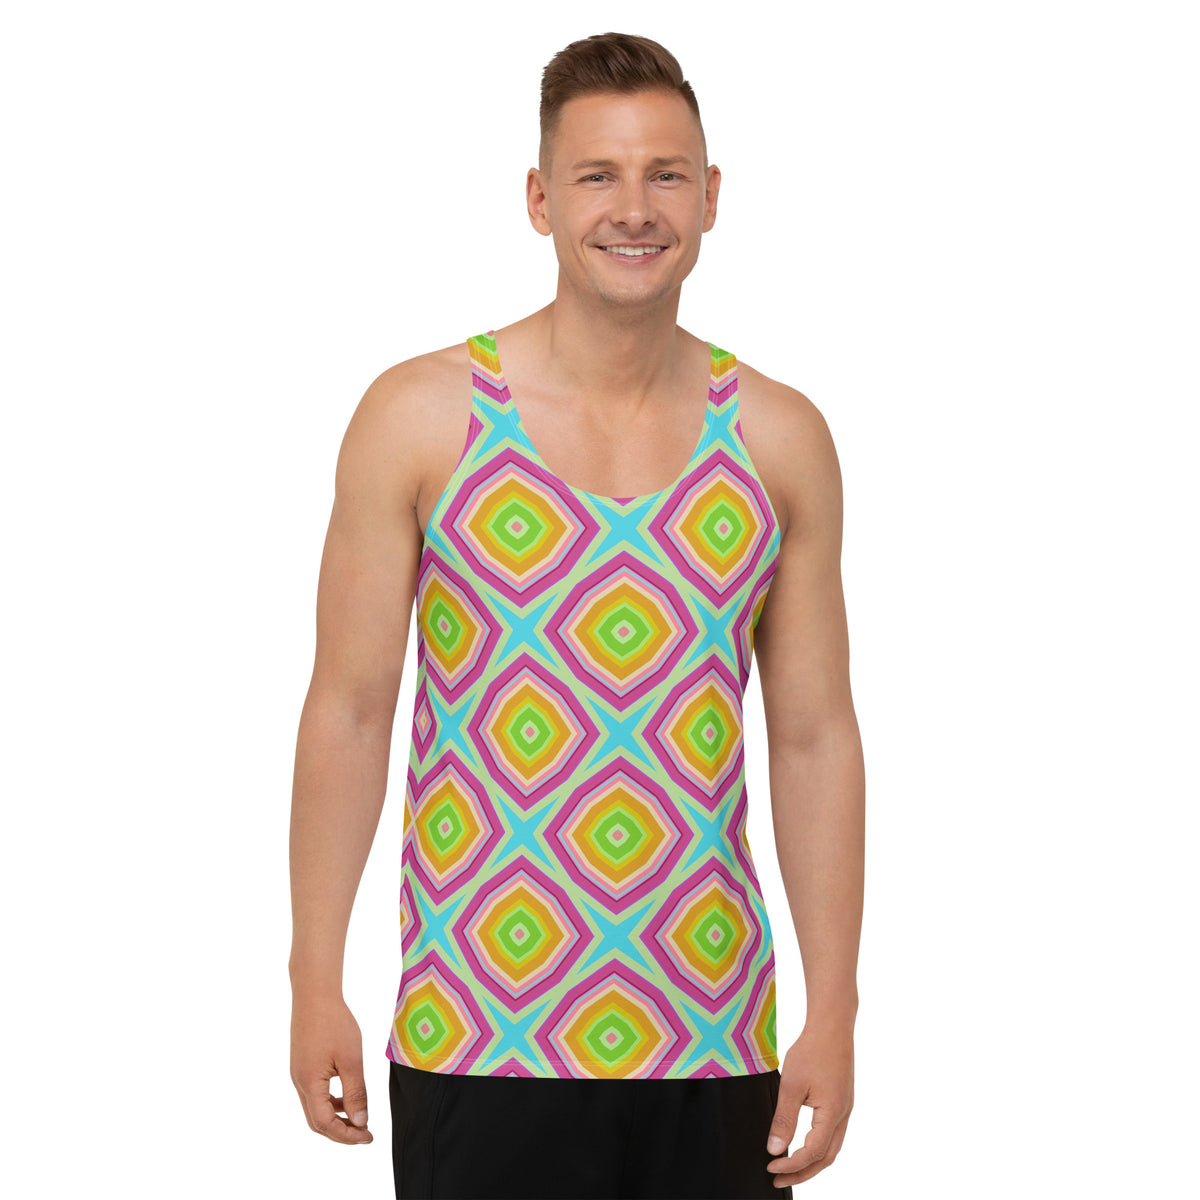 Men's optical illusion 3D tank top in black and white